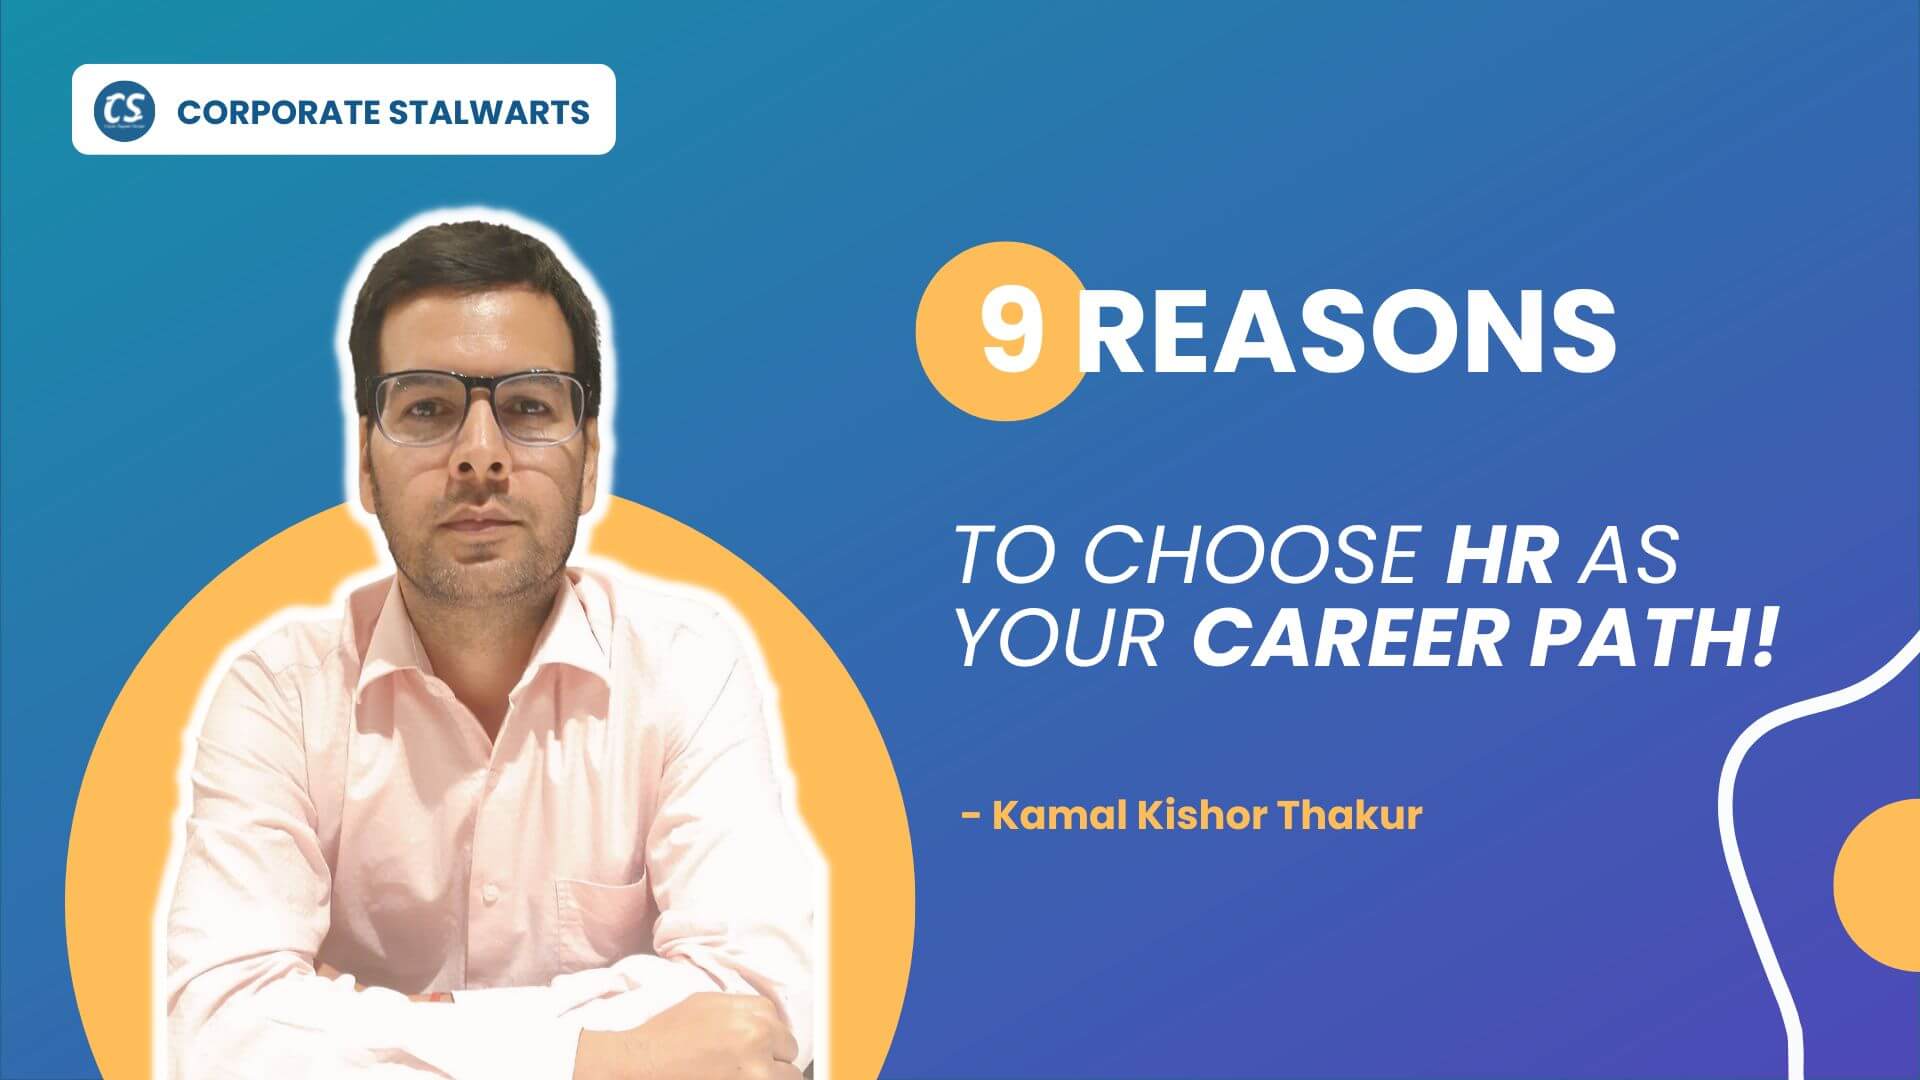 9 Reasons to Choose HR as Your Career Path